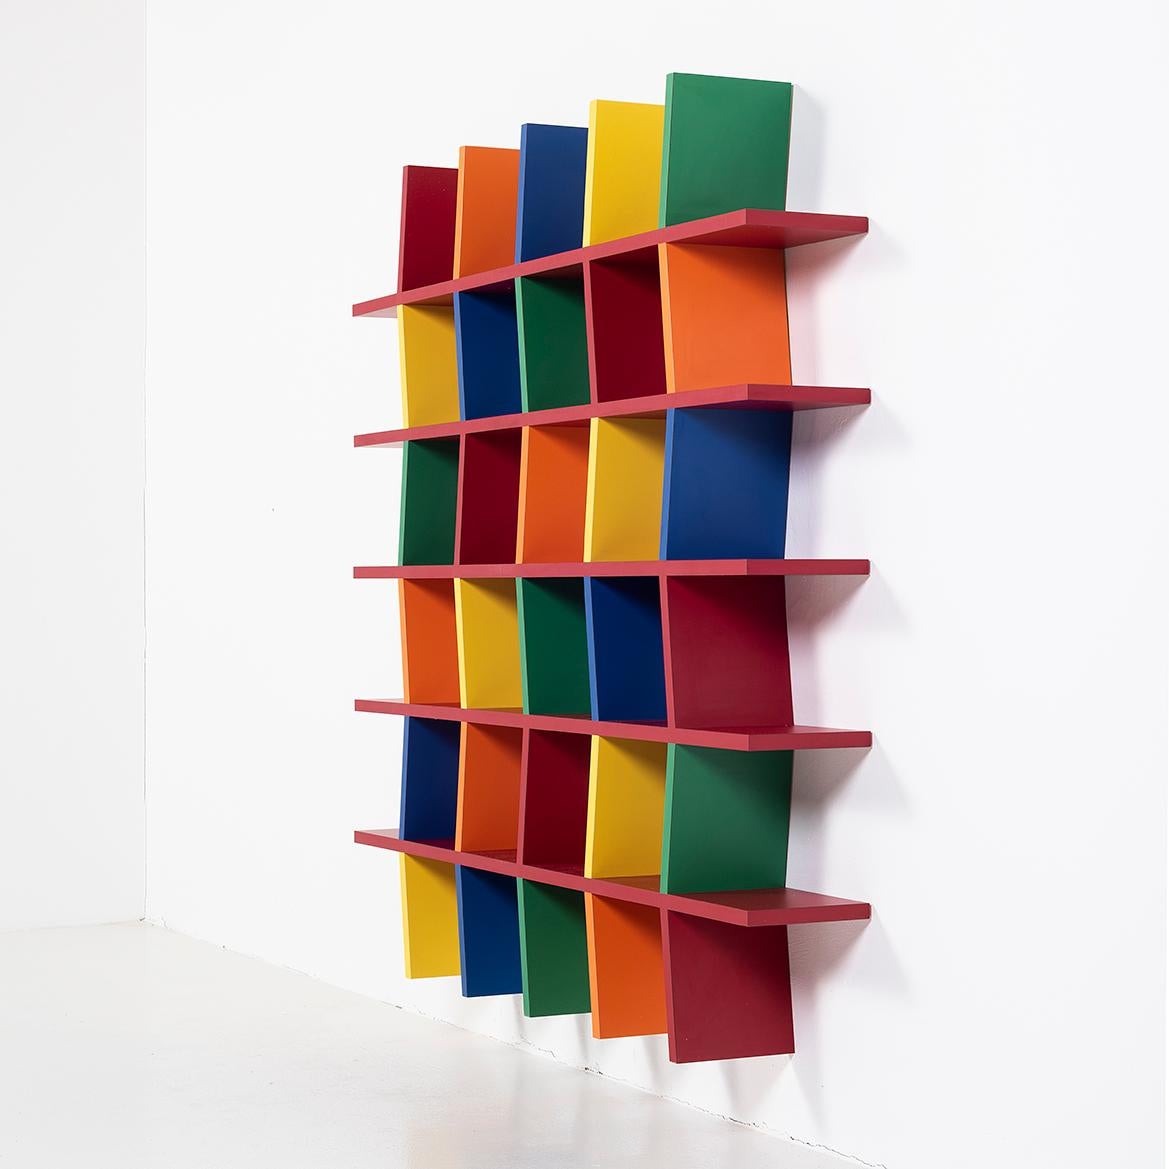 Designed by Shigery Uchida in 2000, SHELF 02 was part of a series shown in a exhibition that toured Tokyo, Nagoy and Sapporo.

As furniture, the design is simple, yet colors give different expressions.  The random arrangement of colors serves as a